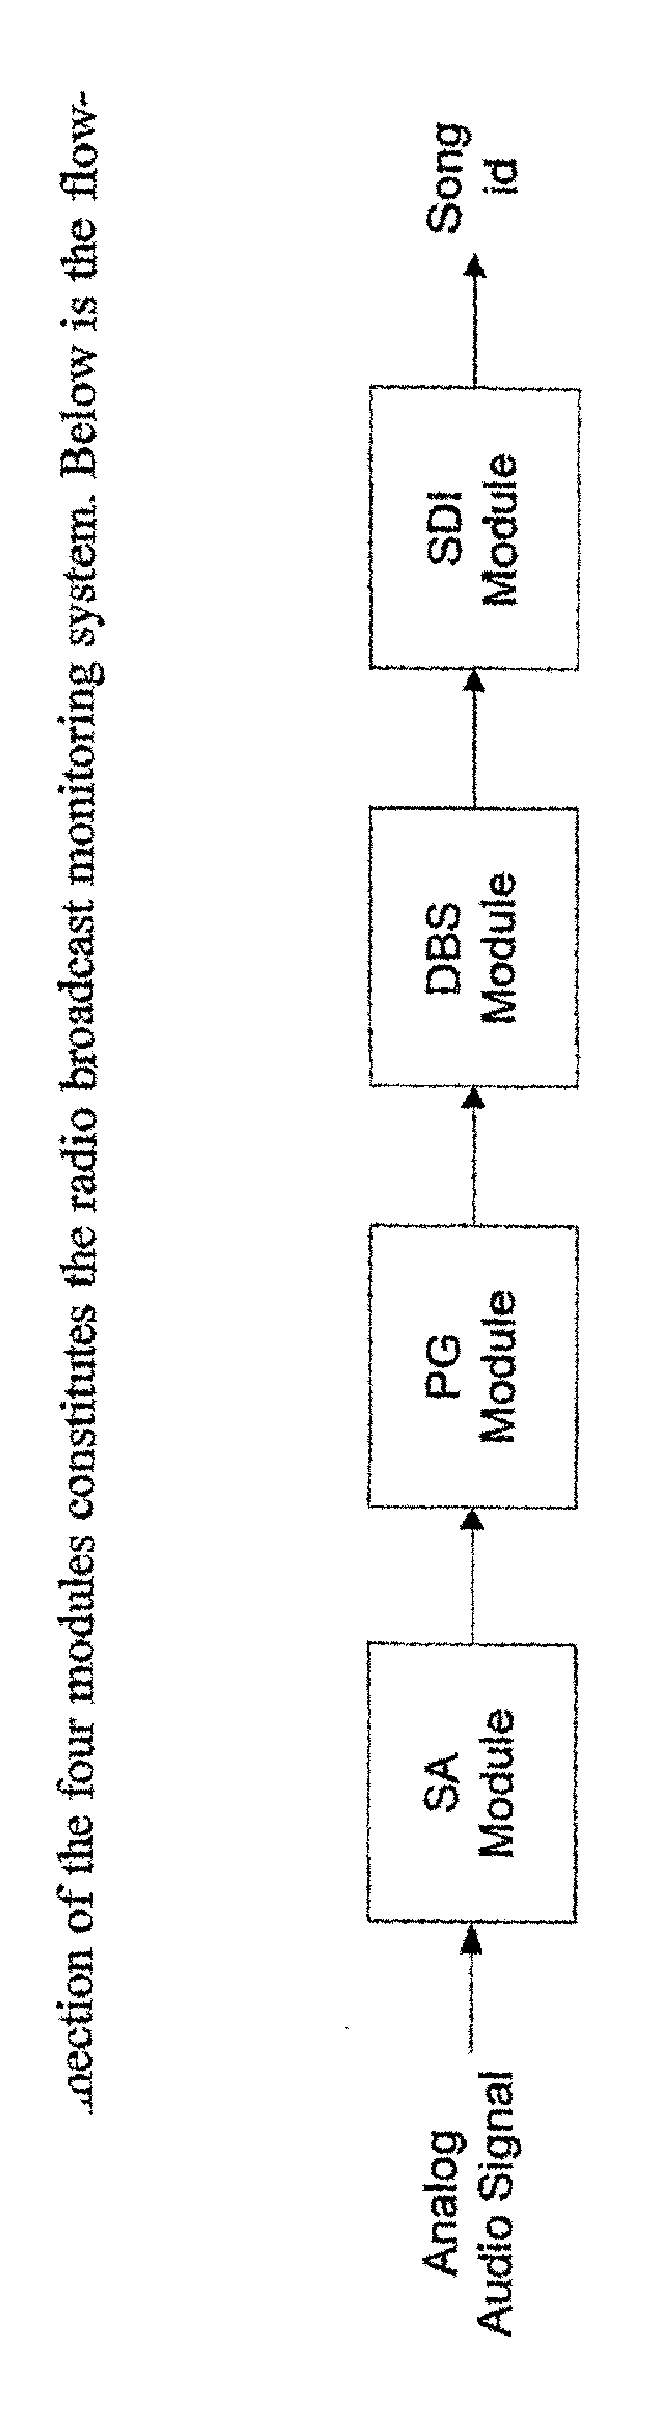 Method and apparatus for automatic detection and identification of broadcast audio and video signals